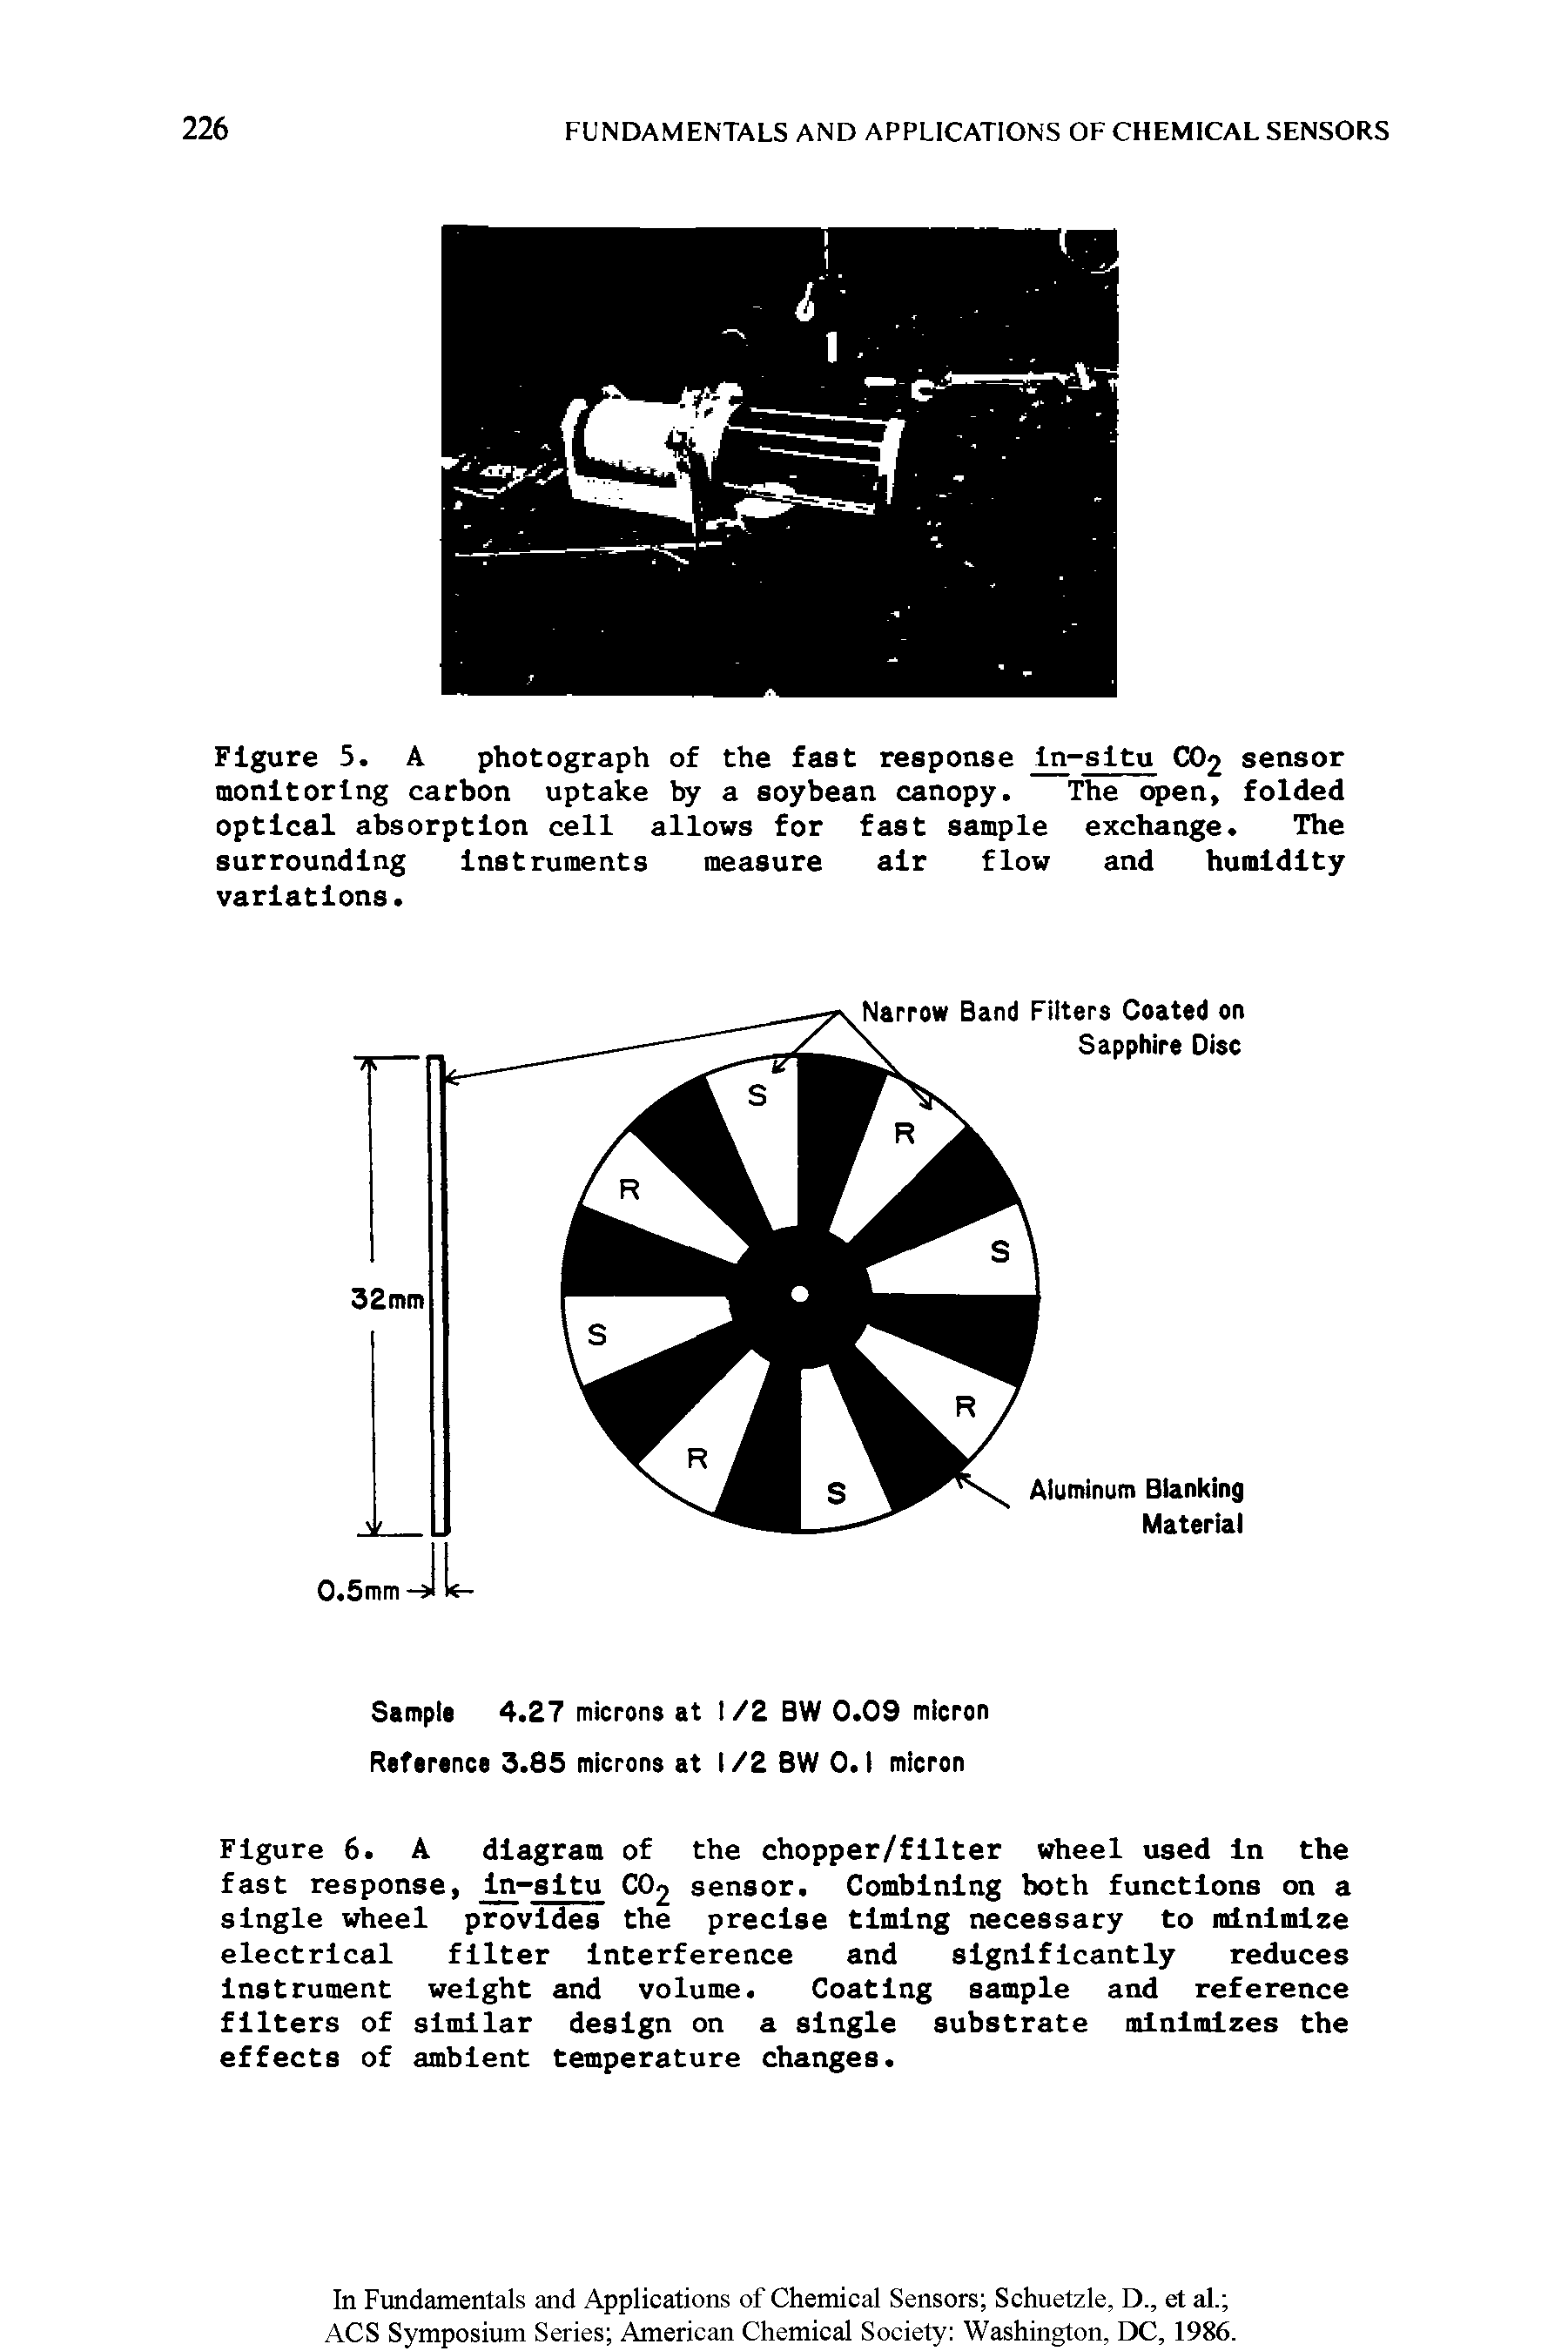 Figure 6. A diagram of the chopper/filter wheel used in the fast response, ln-sltu CO2 sensor. Combining both functions on a single wheel provides the precise timing necessary to minimize electrical filter interference and significantly reduces instrument weight and volume. Coating sample and reference...